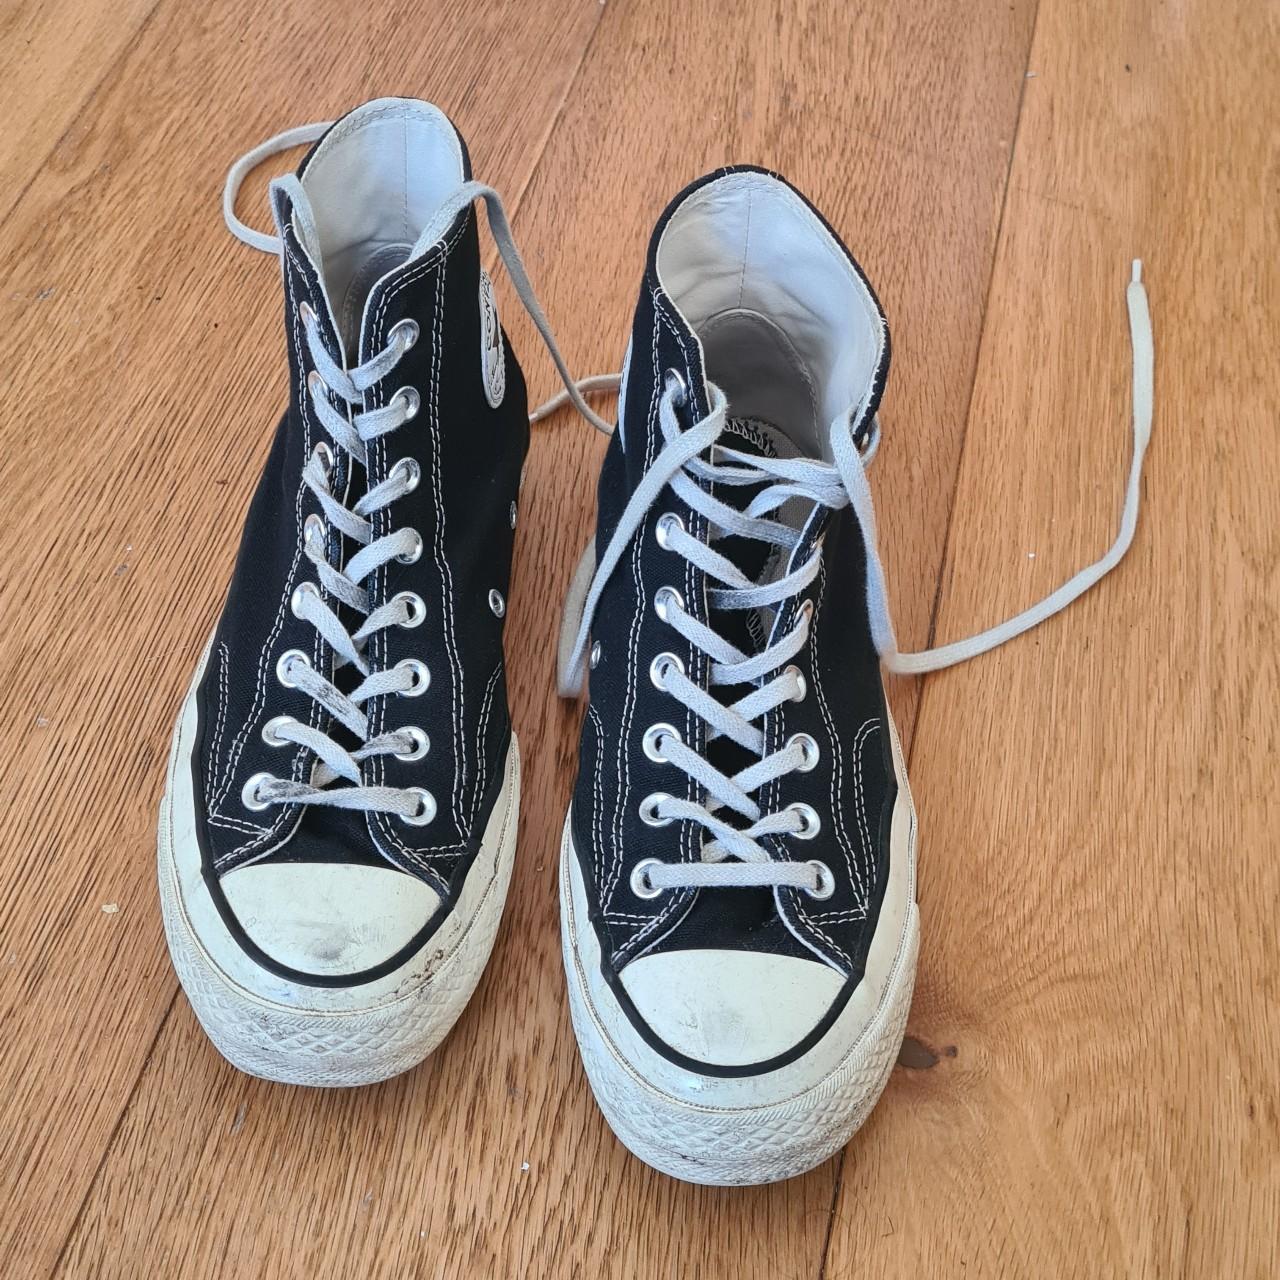 Worn 1970s Converse in Black Size 7 🌷 I've had these... - Depop